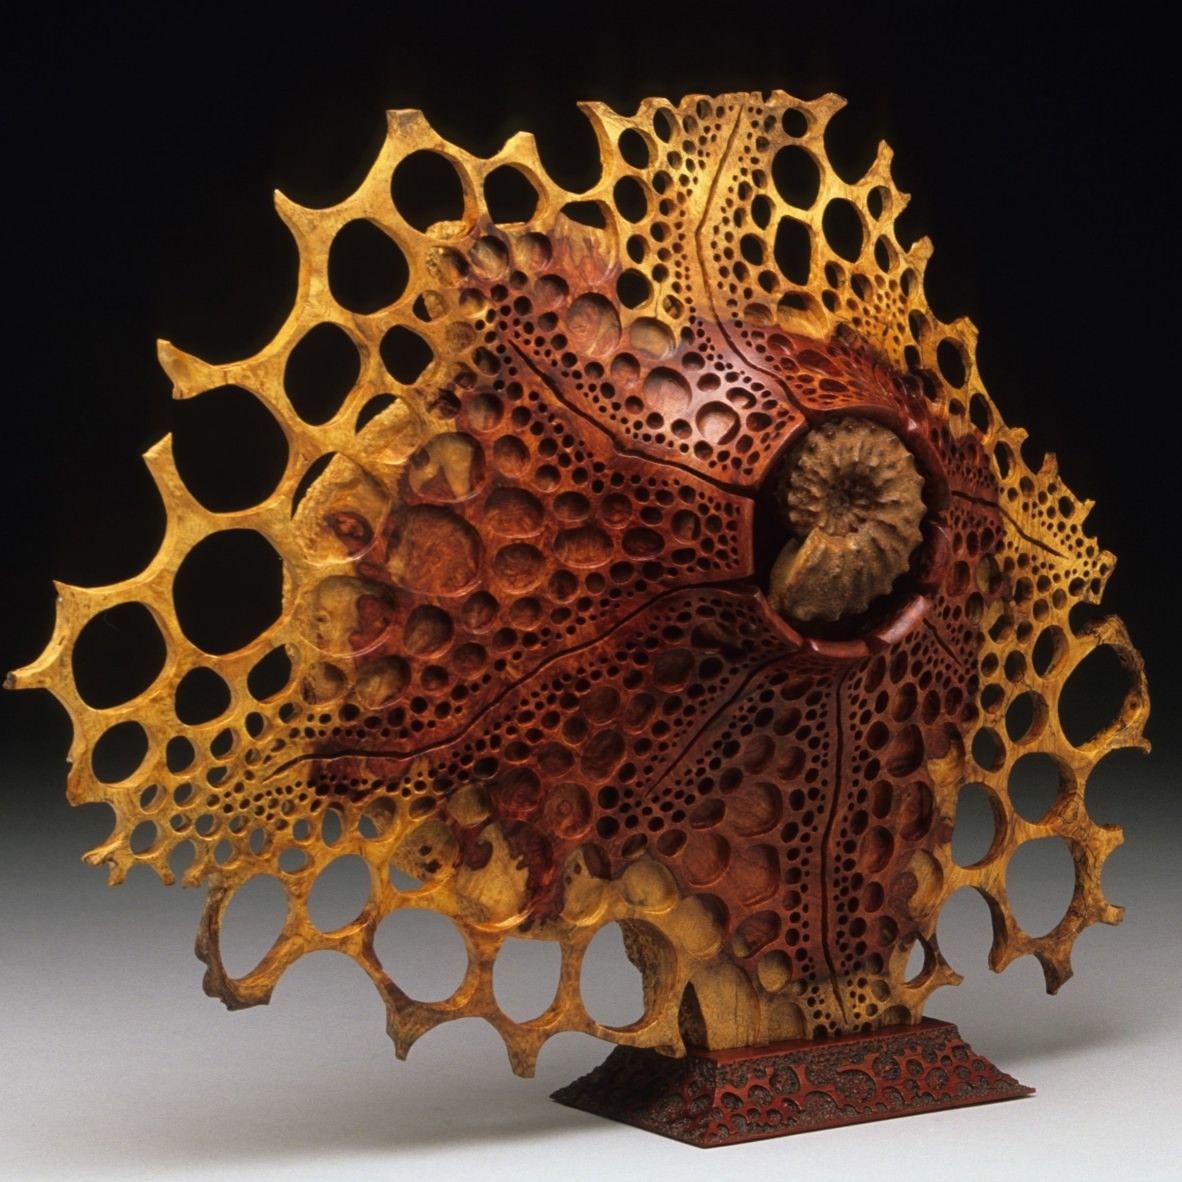 Hand Crafted Free-Standing Wood Sculpture "Ammonite" by ...
